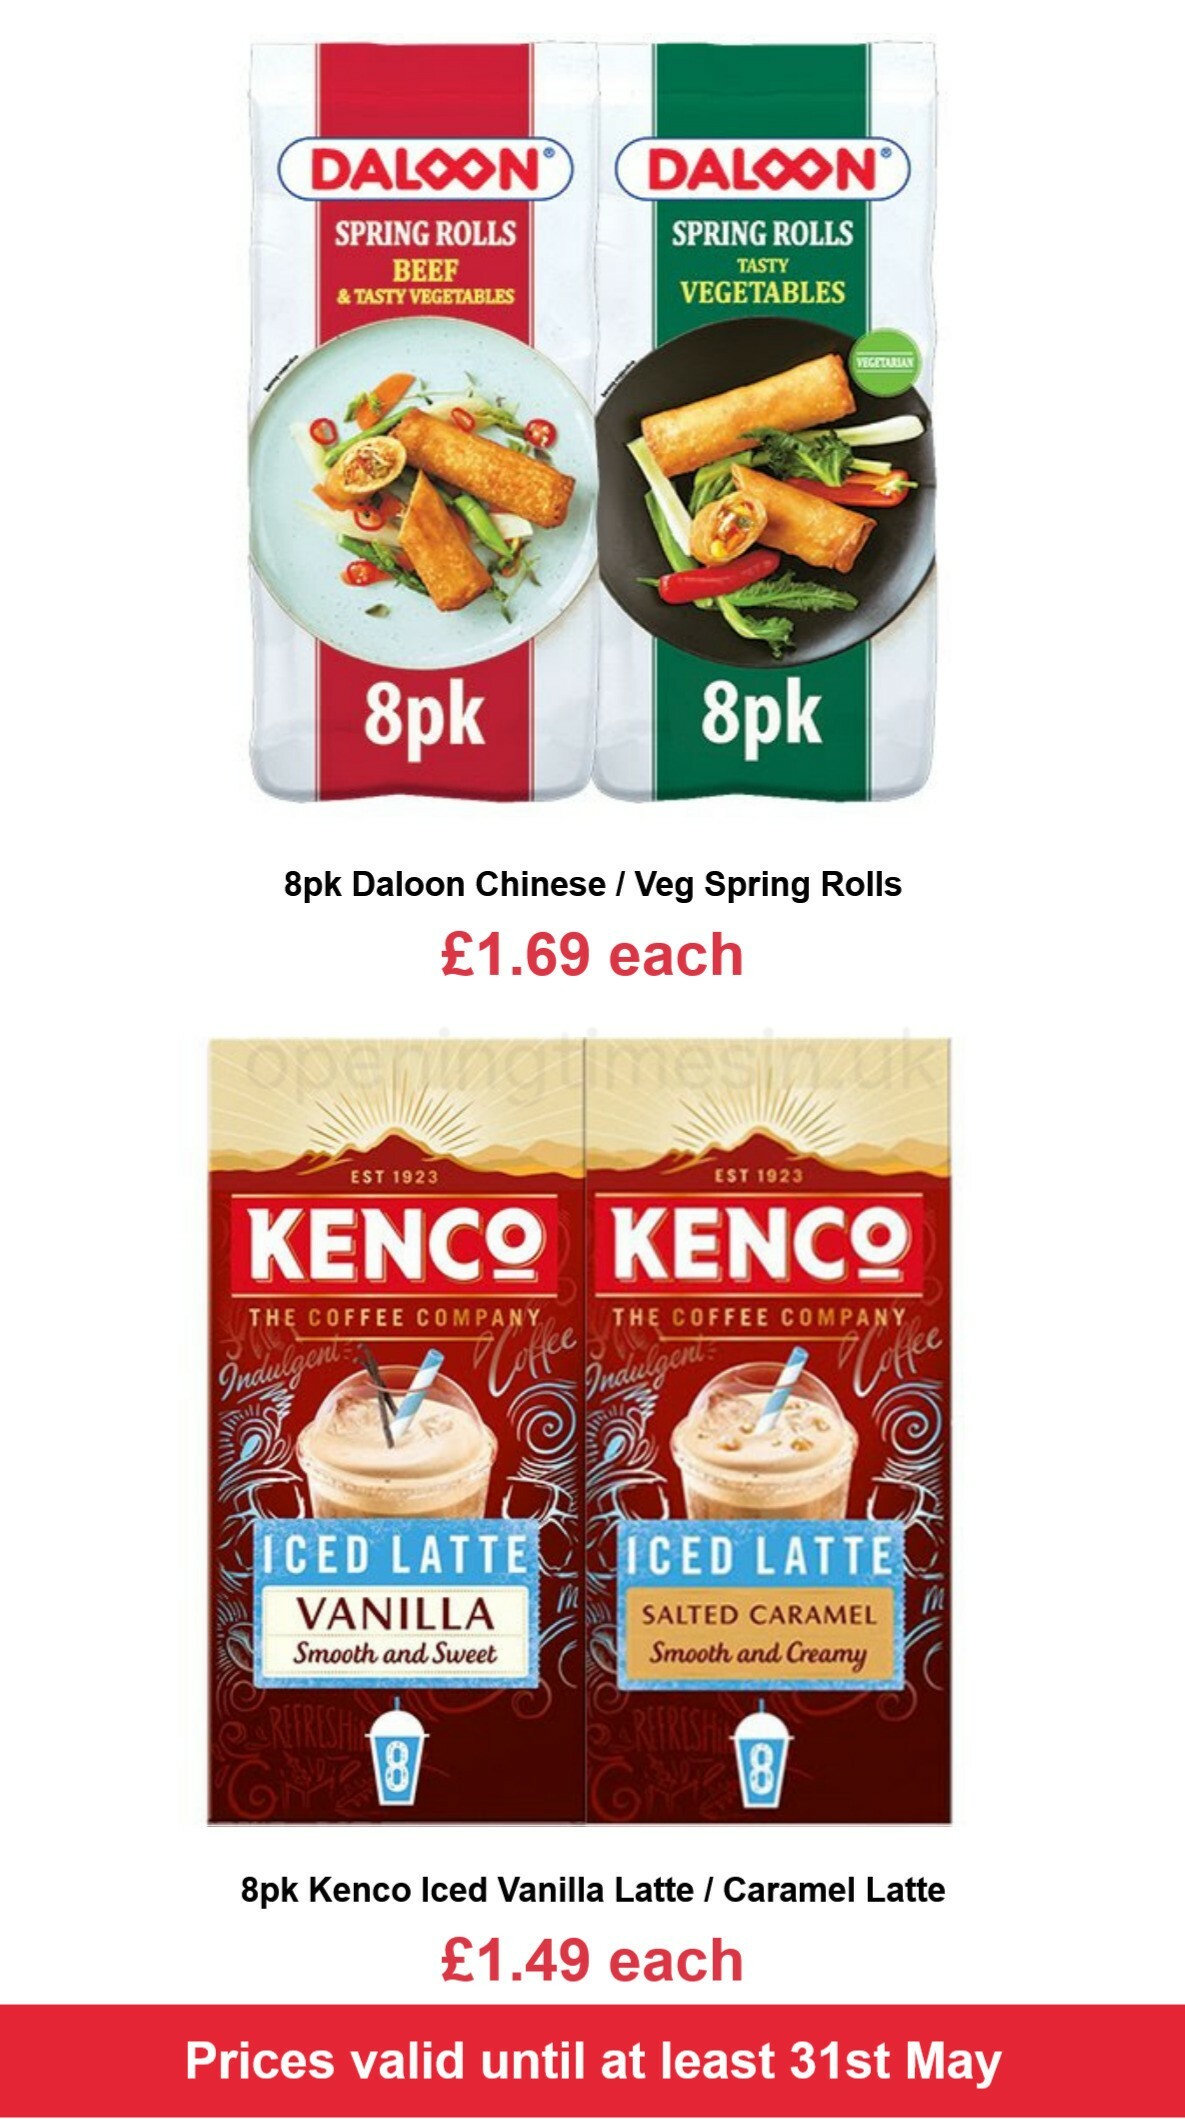 Farmfoods Offers from 20 May